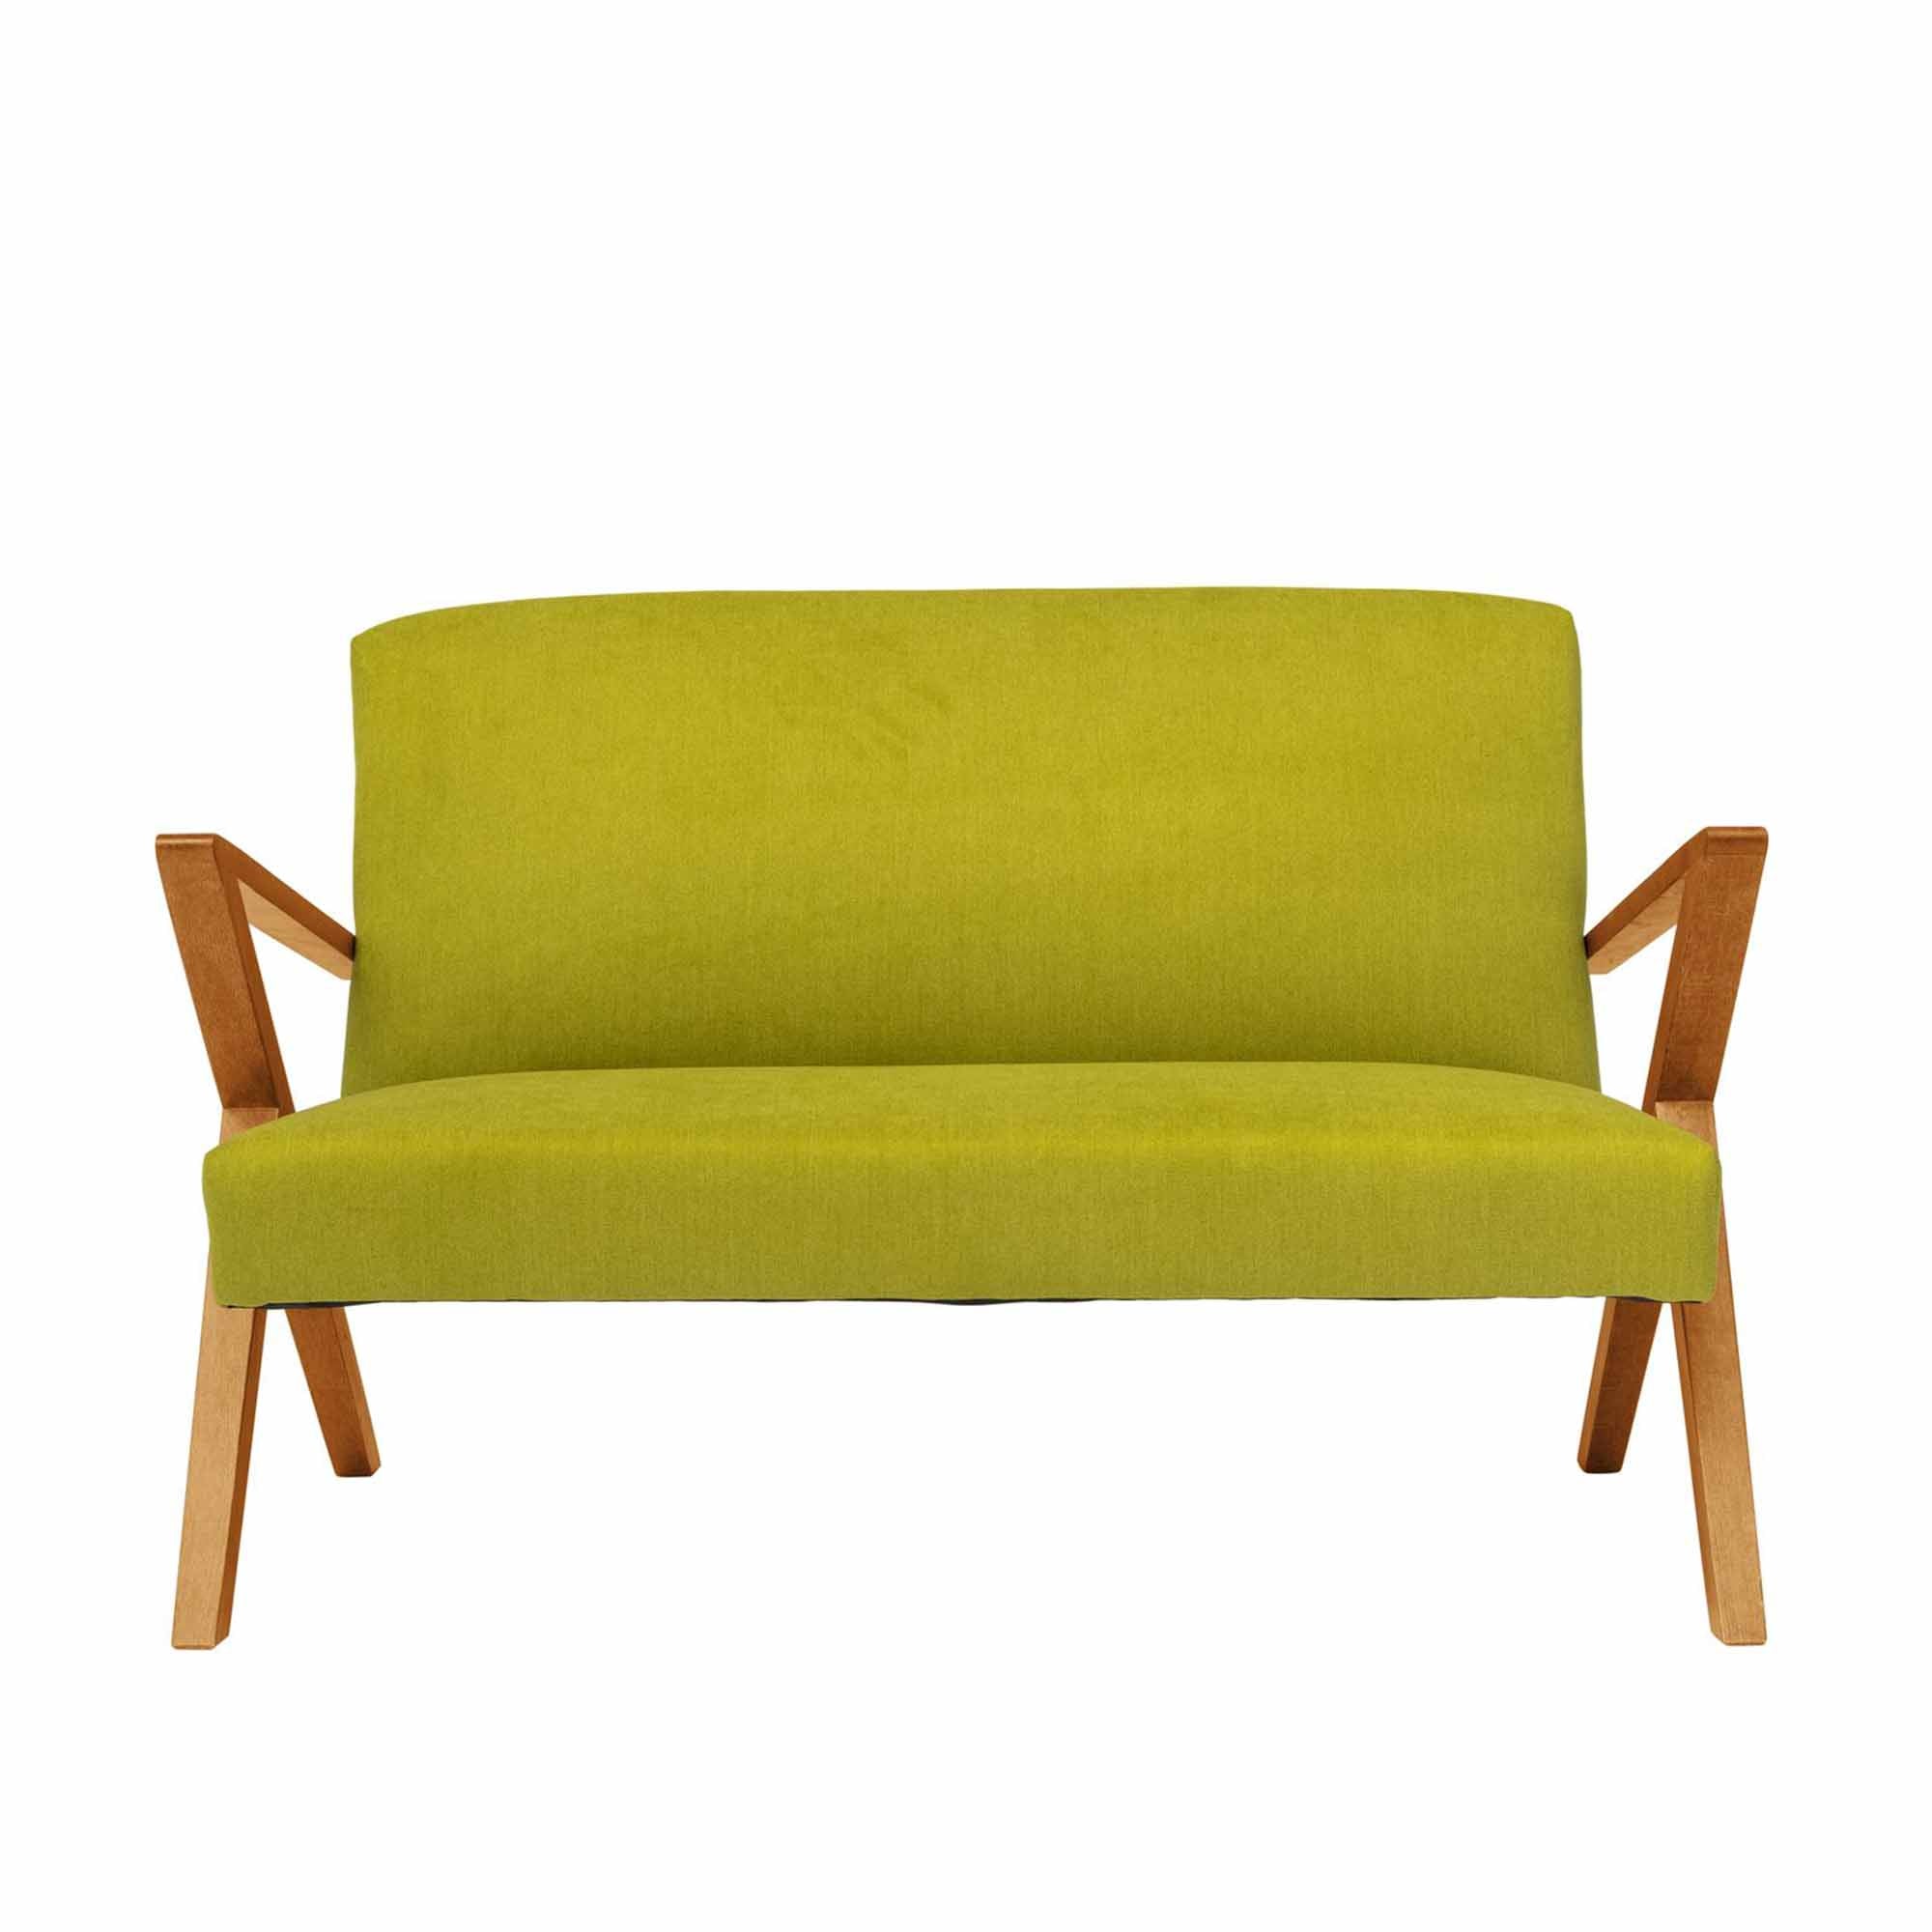 2-Seater Sofa, Beech Wood Frame, Oak Colour green fabric, front view